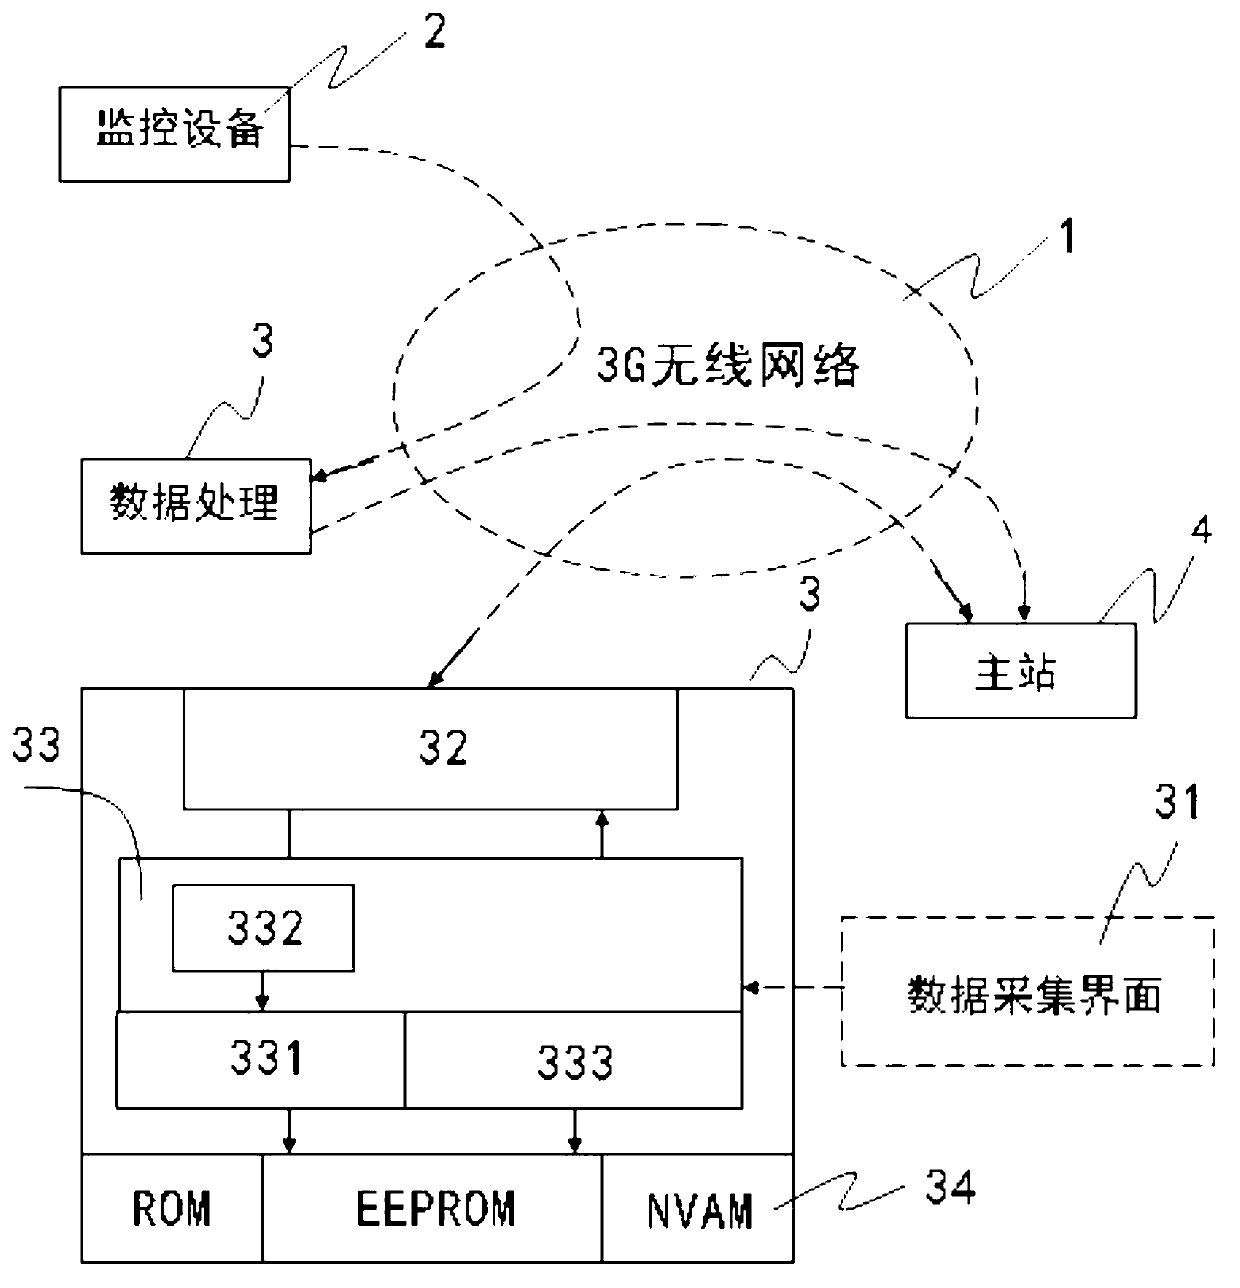 Anti-damage monitoring system and method for network in area under jurisdiction